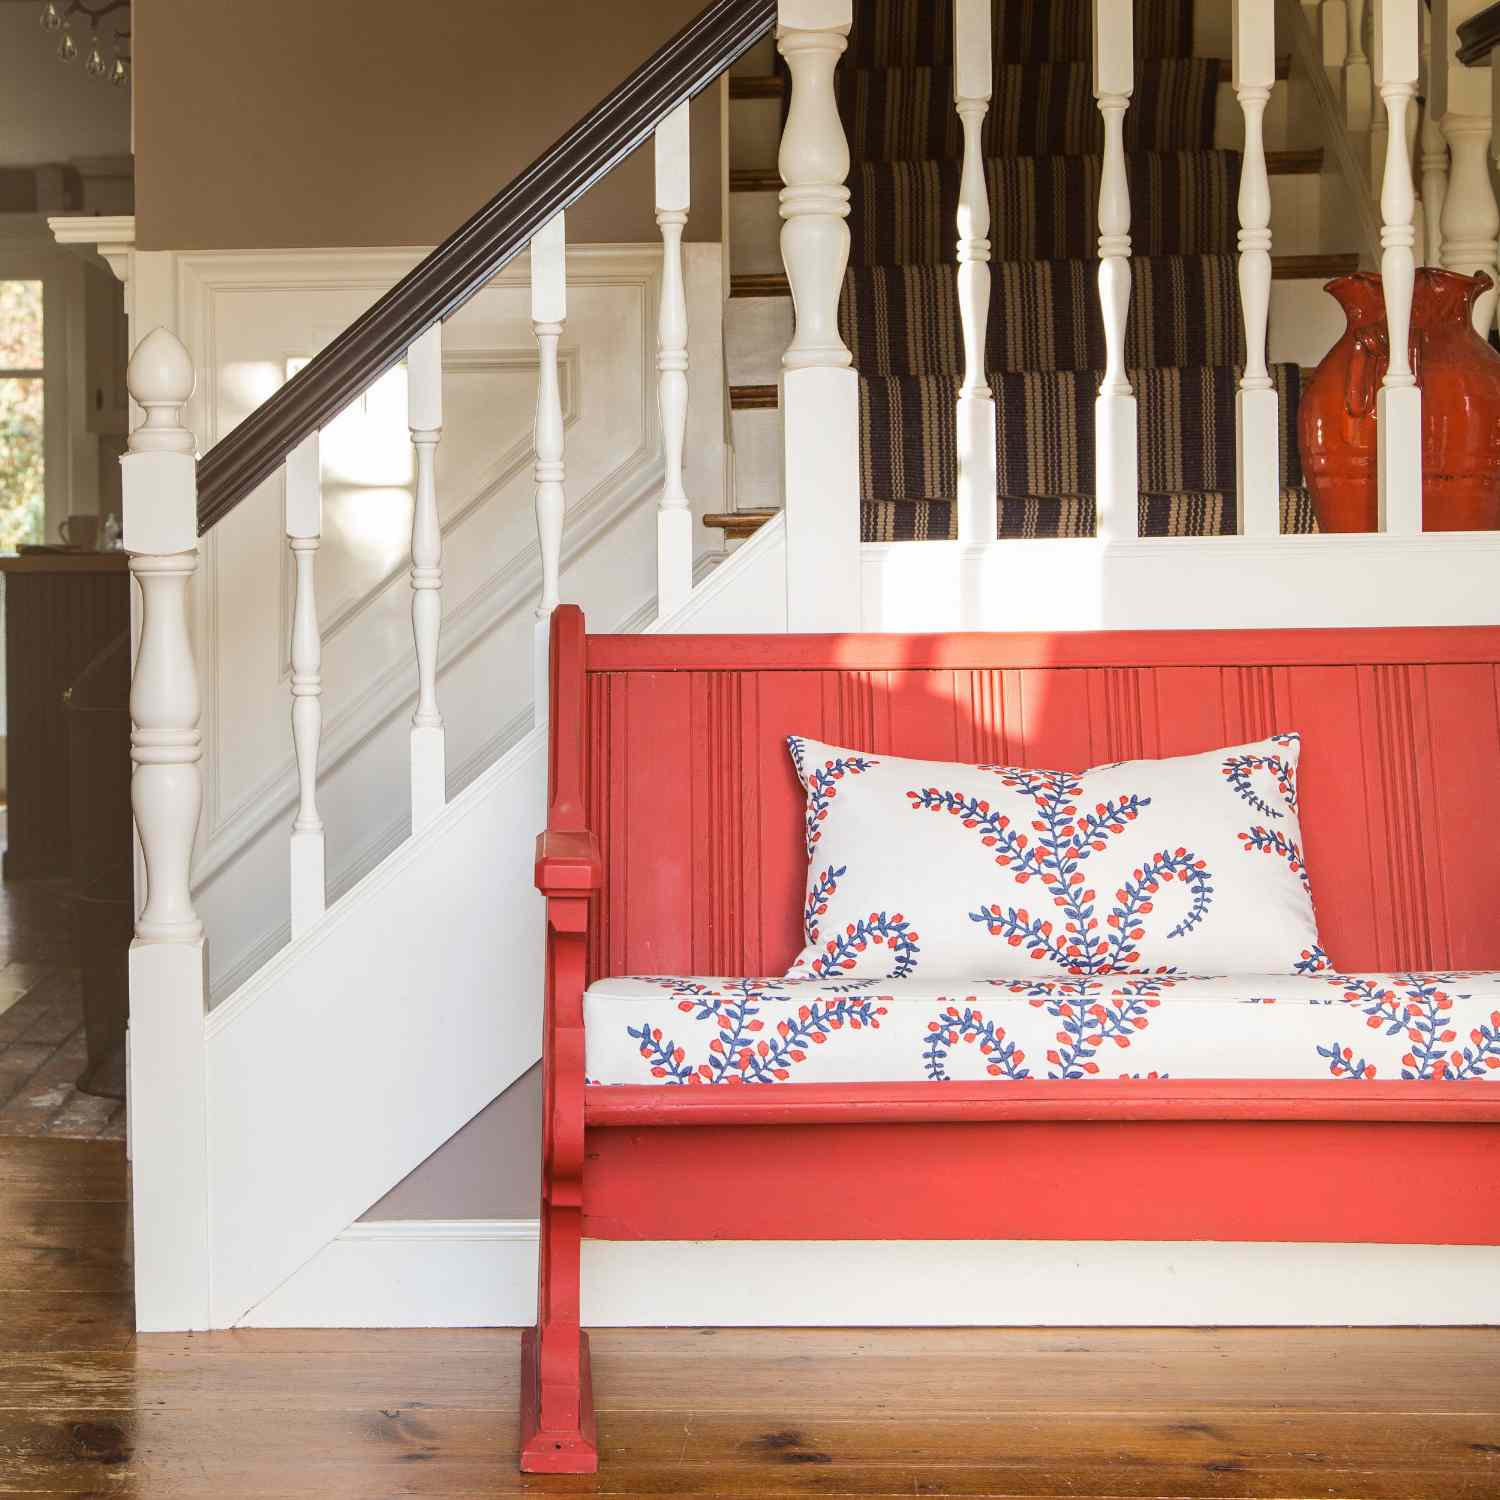 Alprilla Farm by Mary Maloney entryway with red bench